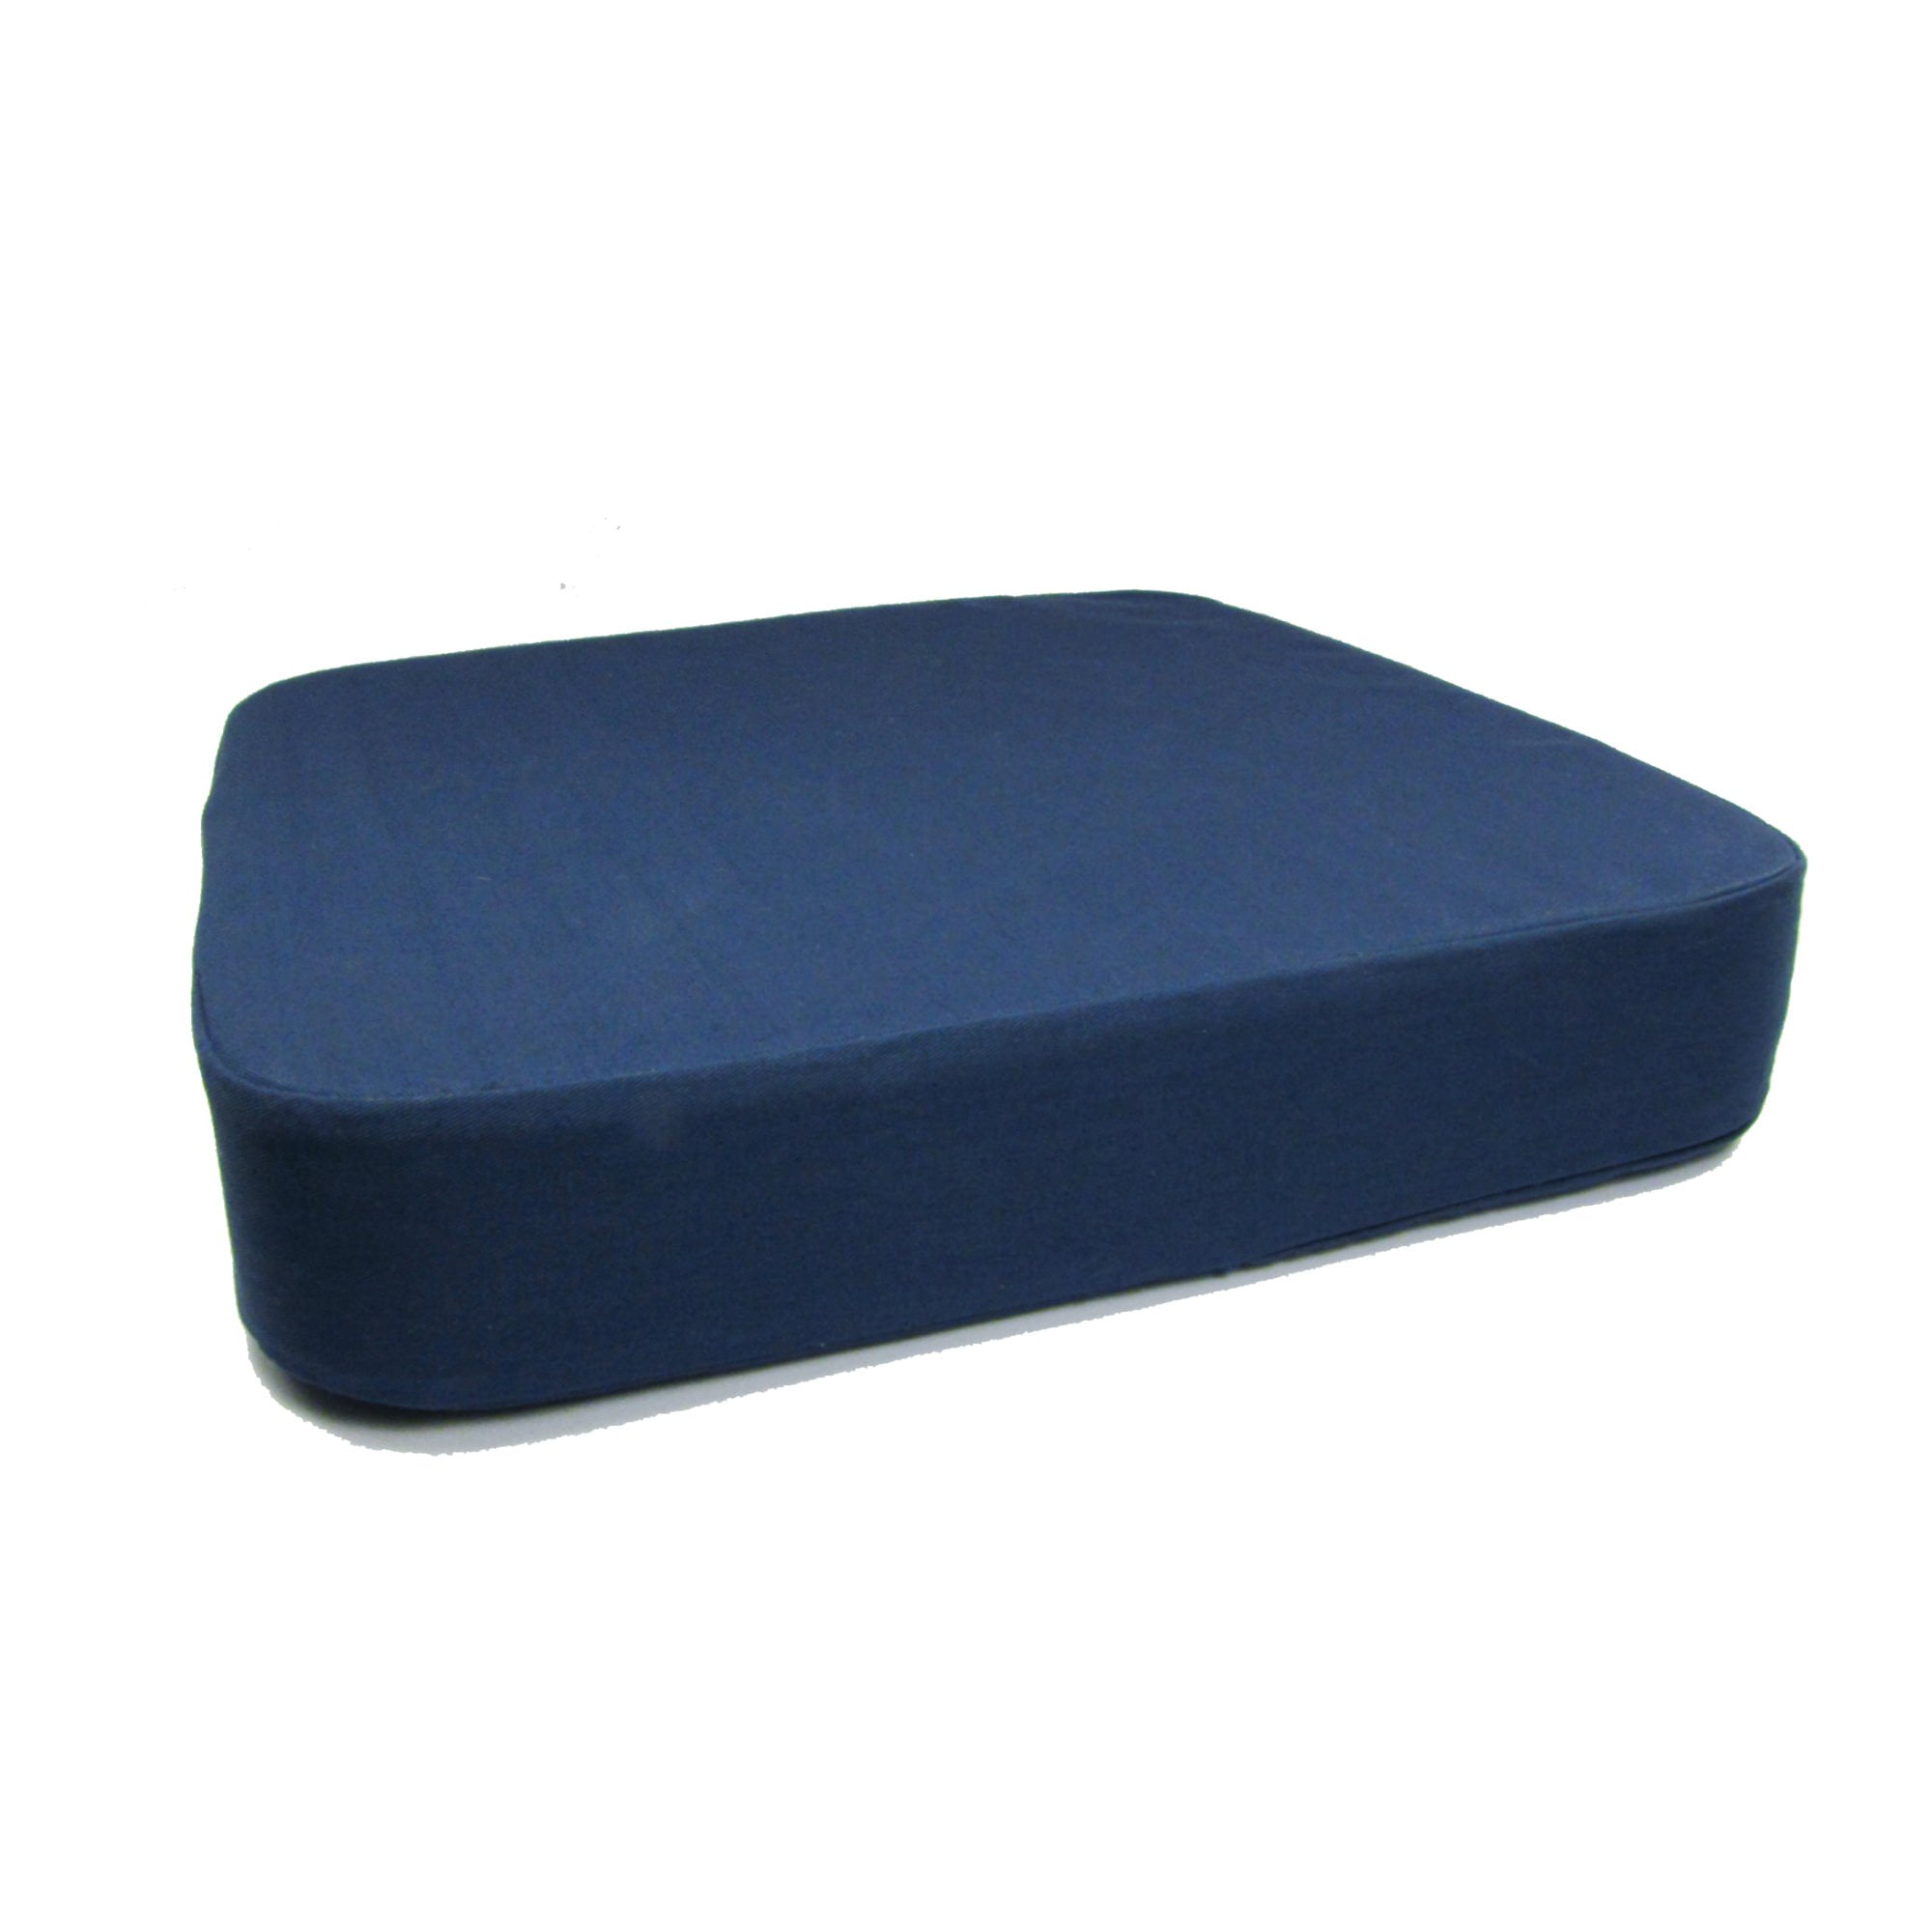 FIRM Dreamsweet Memory Foam Extra Thick Dual Layer Seat Cushion Pad for  Office, Home Sitting & Driving Comfort 